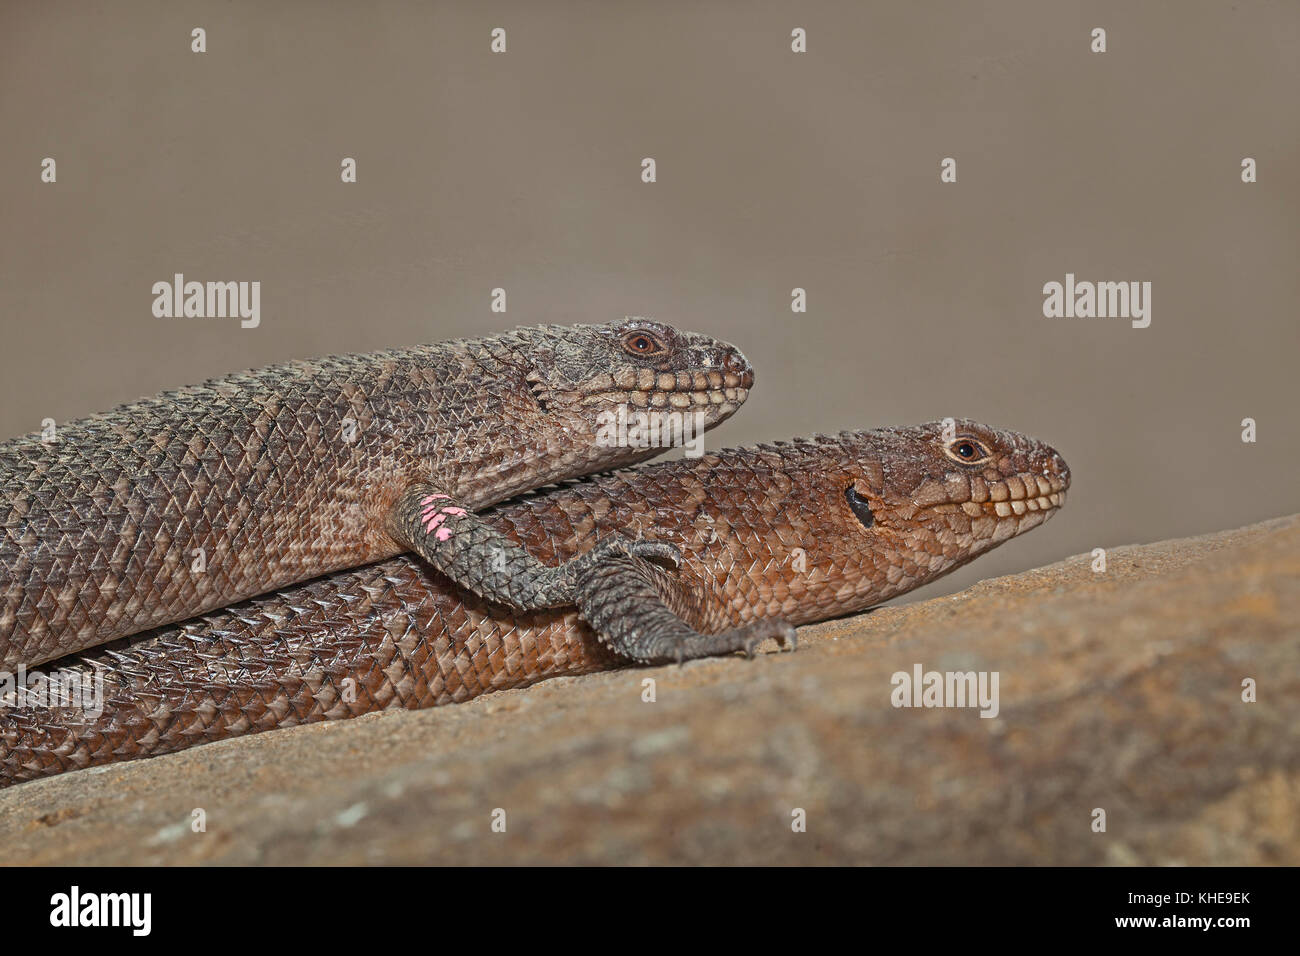 Gidgee Skinks from Central Southern Australia Stock Photo